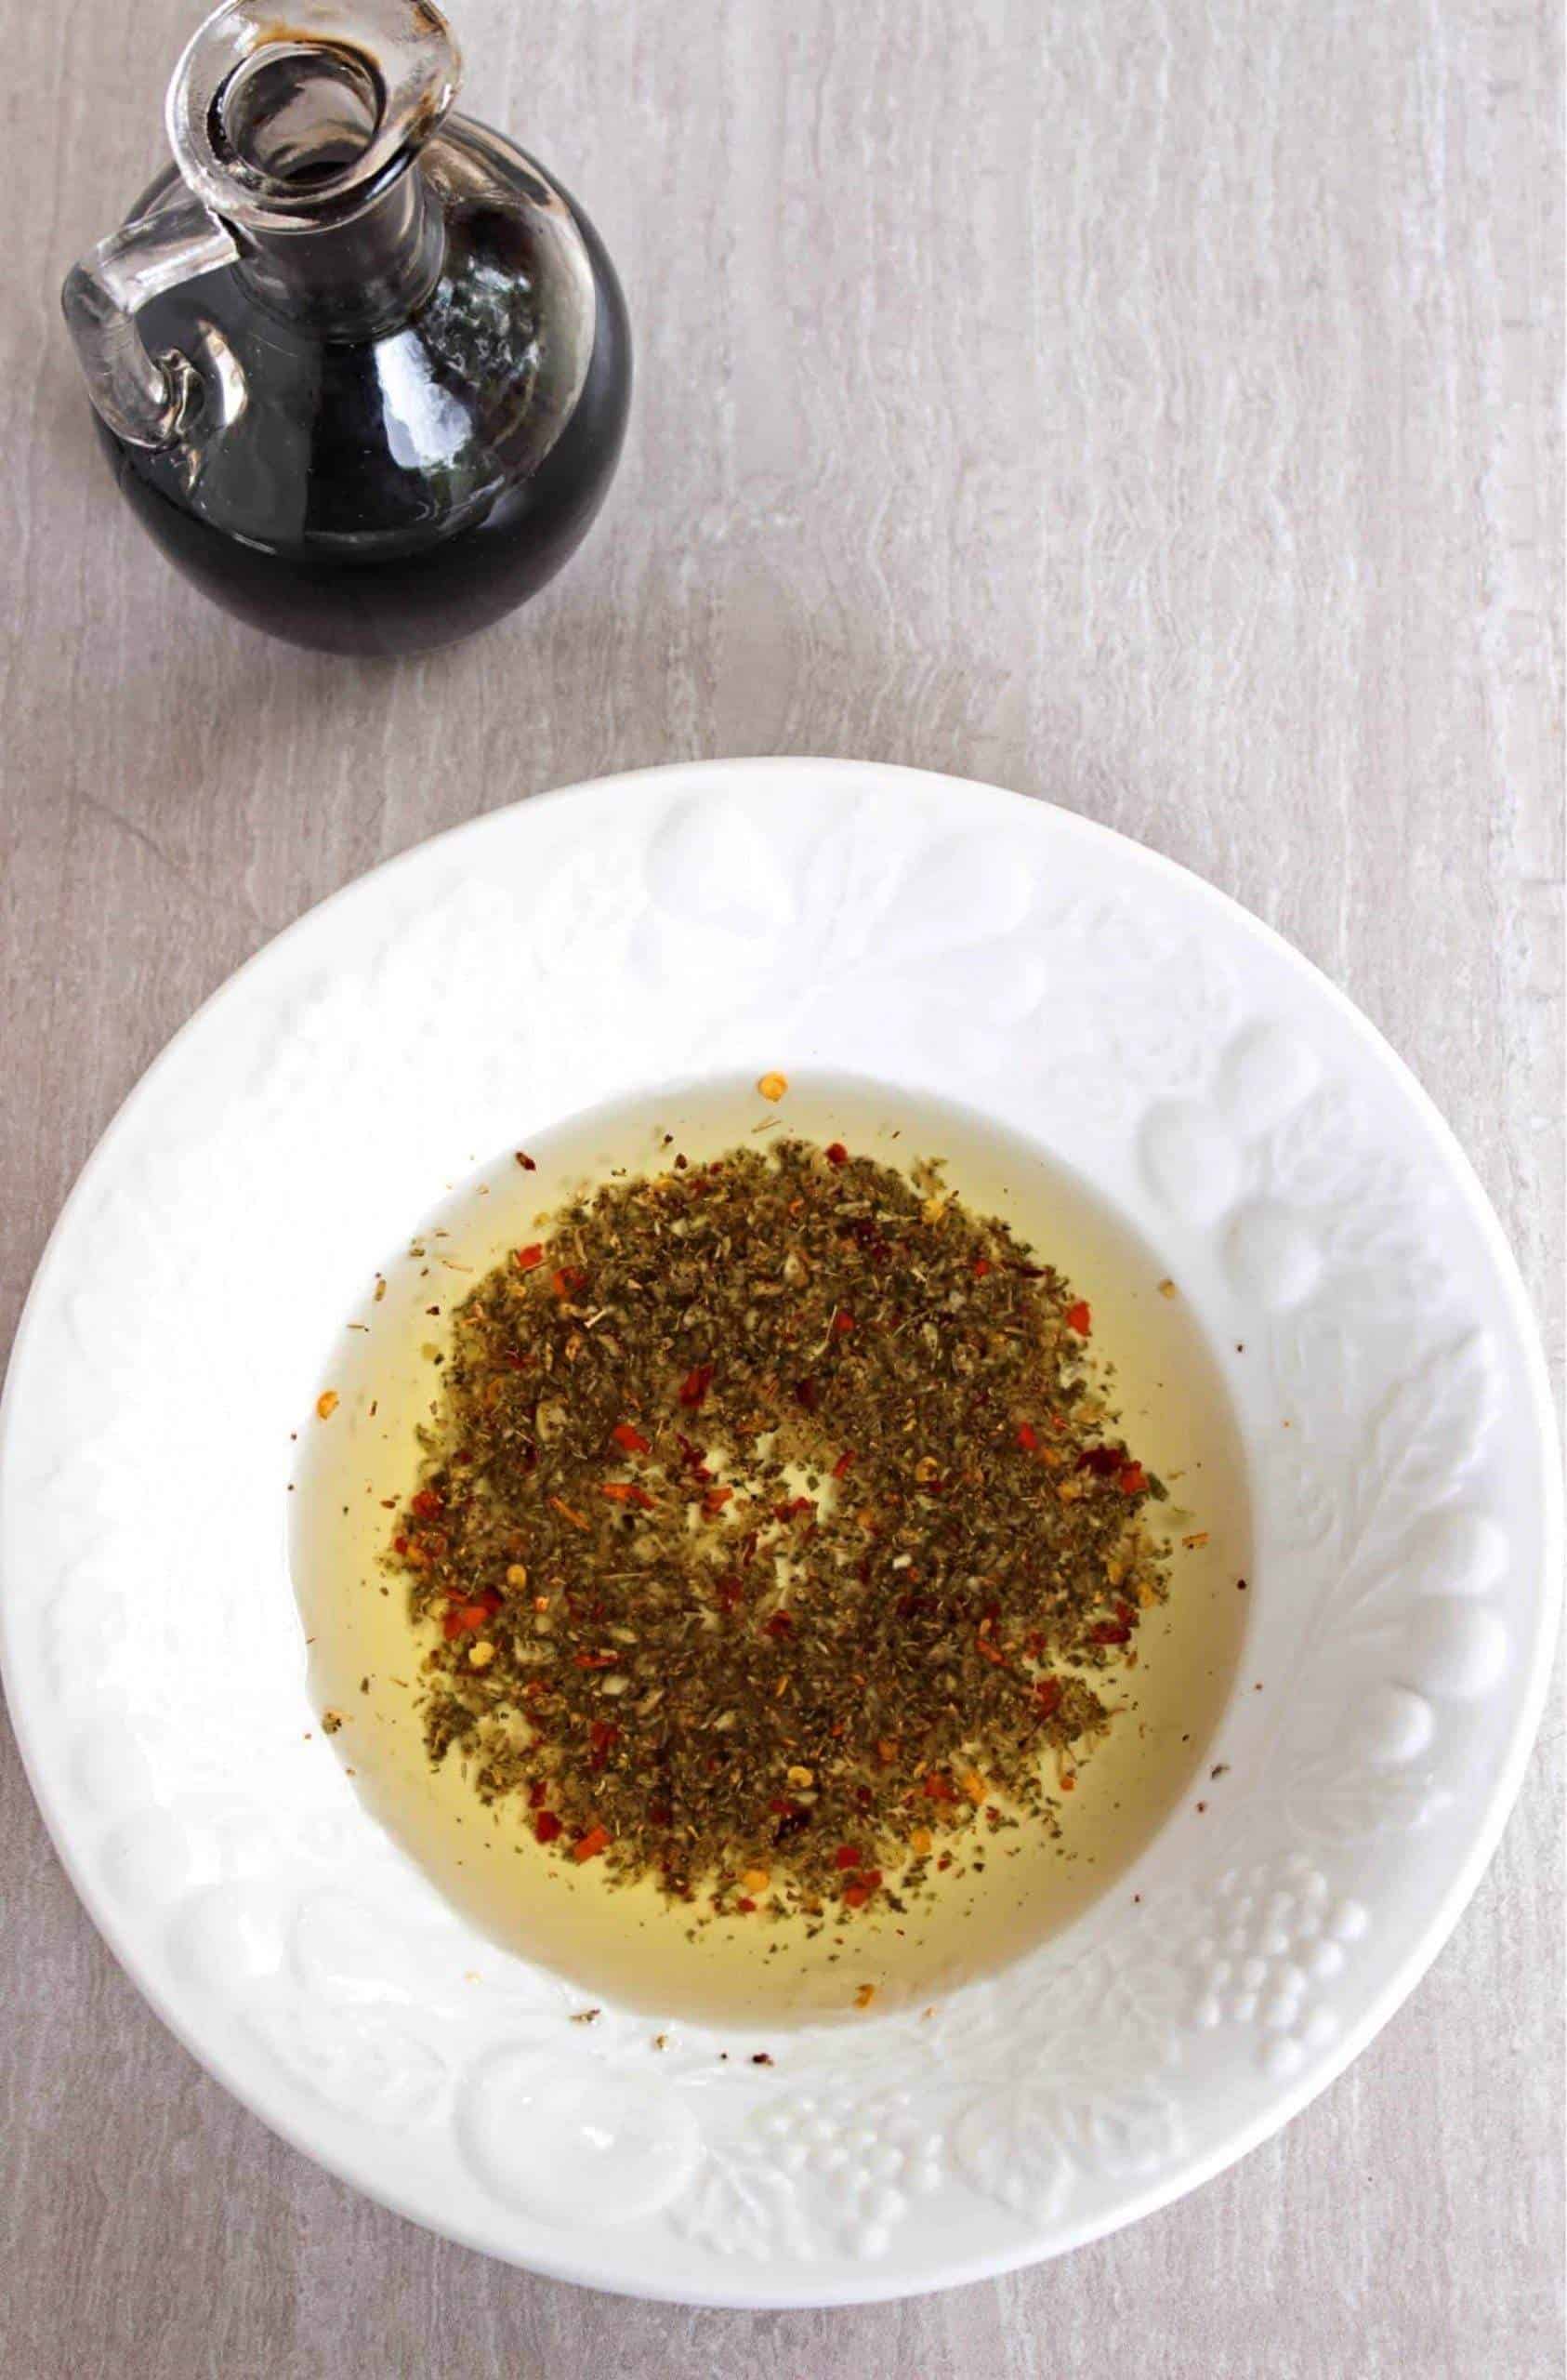 How to make Garlic and herb dipping oil